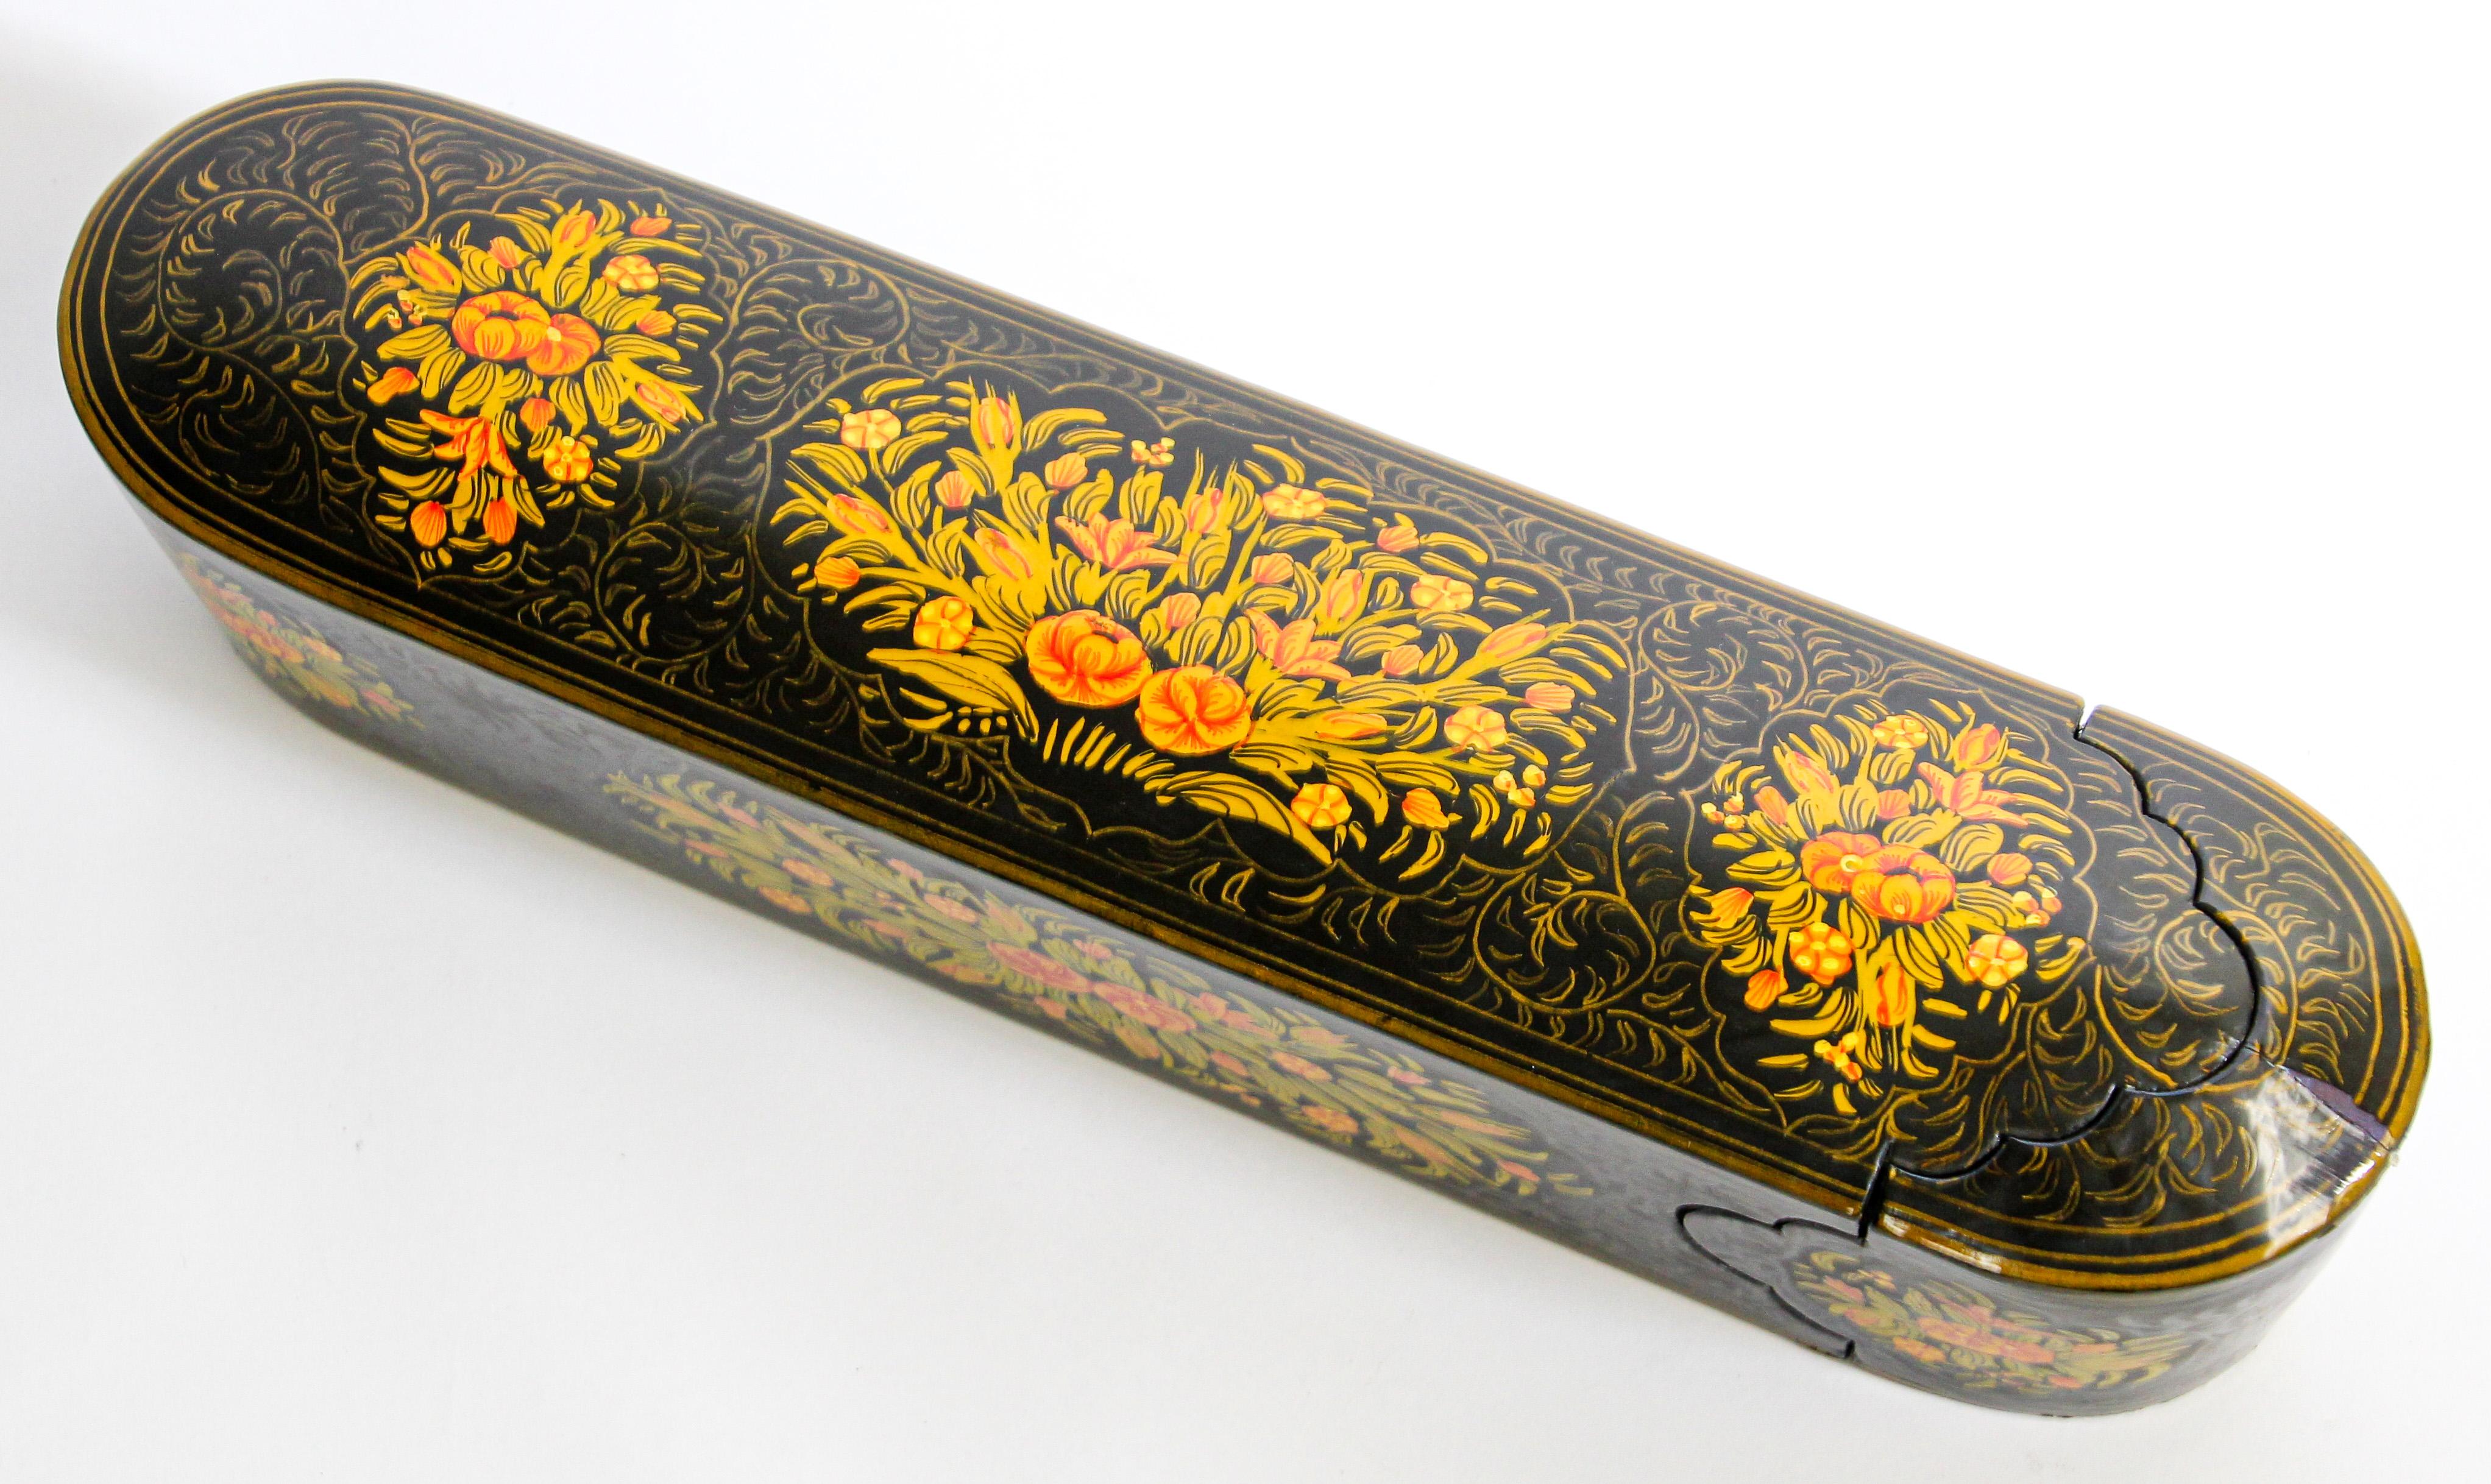 Indo Persian Lacquer Pen Box Hand Painted with Floral Design 6